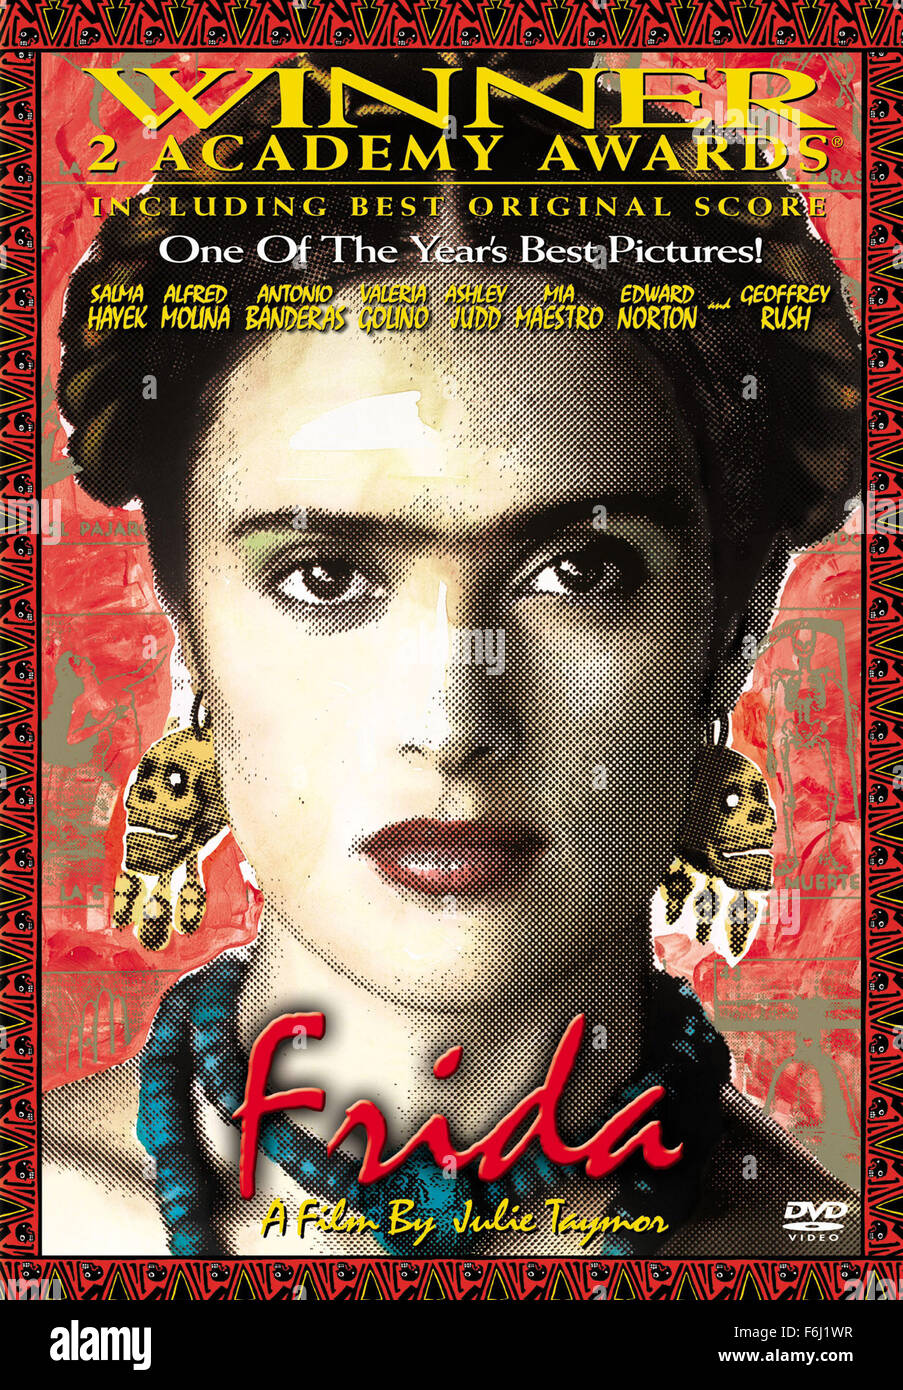 RELEASE DATE: Nov. 20, 2002. MOVIE TITLE: Frida. STUDIO: Miramax Films. PLOT: A biography of artist Frida Kahlo, who channeled the pain of a crippling injury and her tempestuous marriage into her work. PICTURED: Movie Poster. Stock Photo